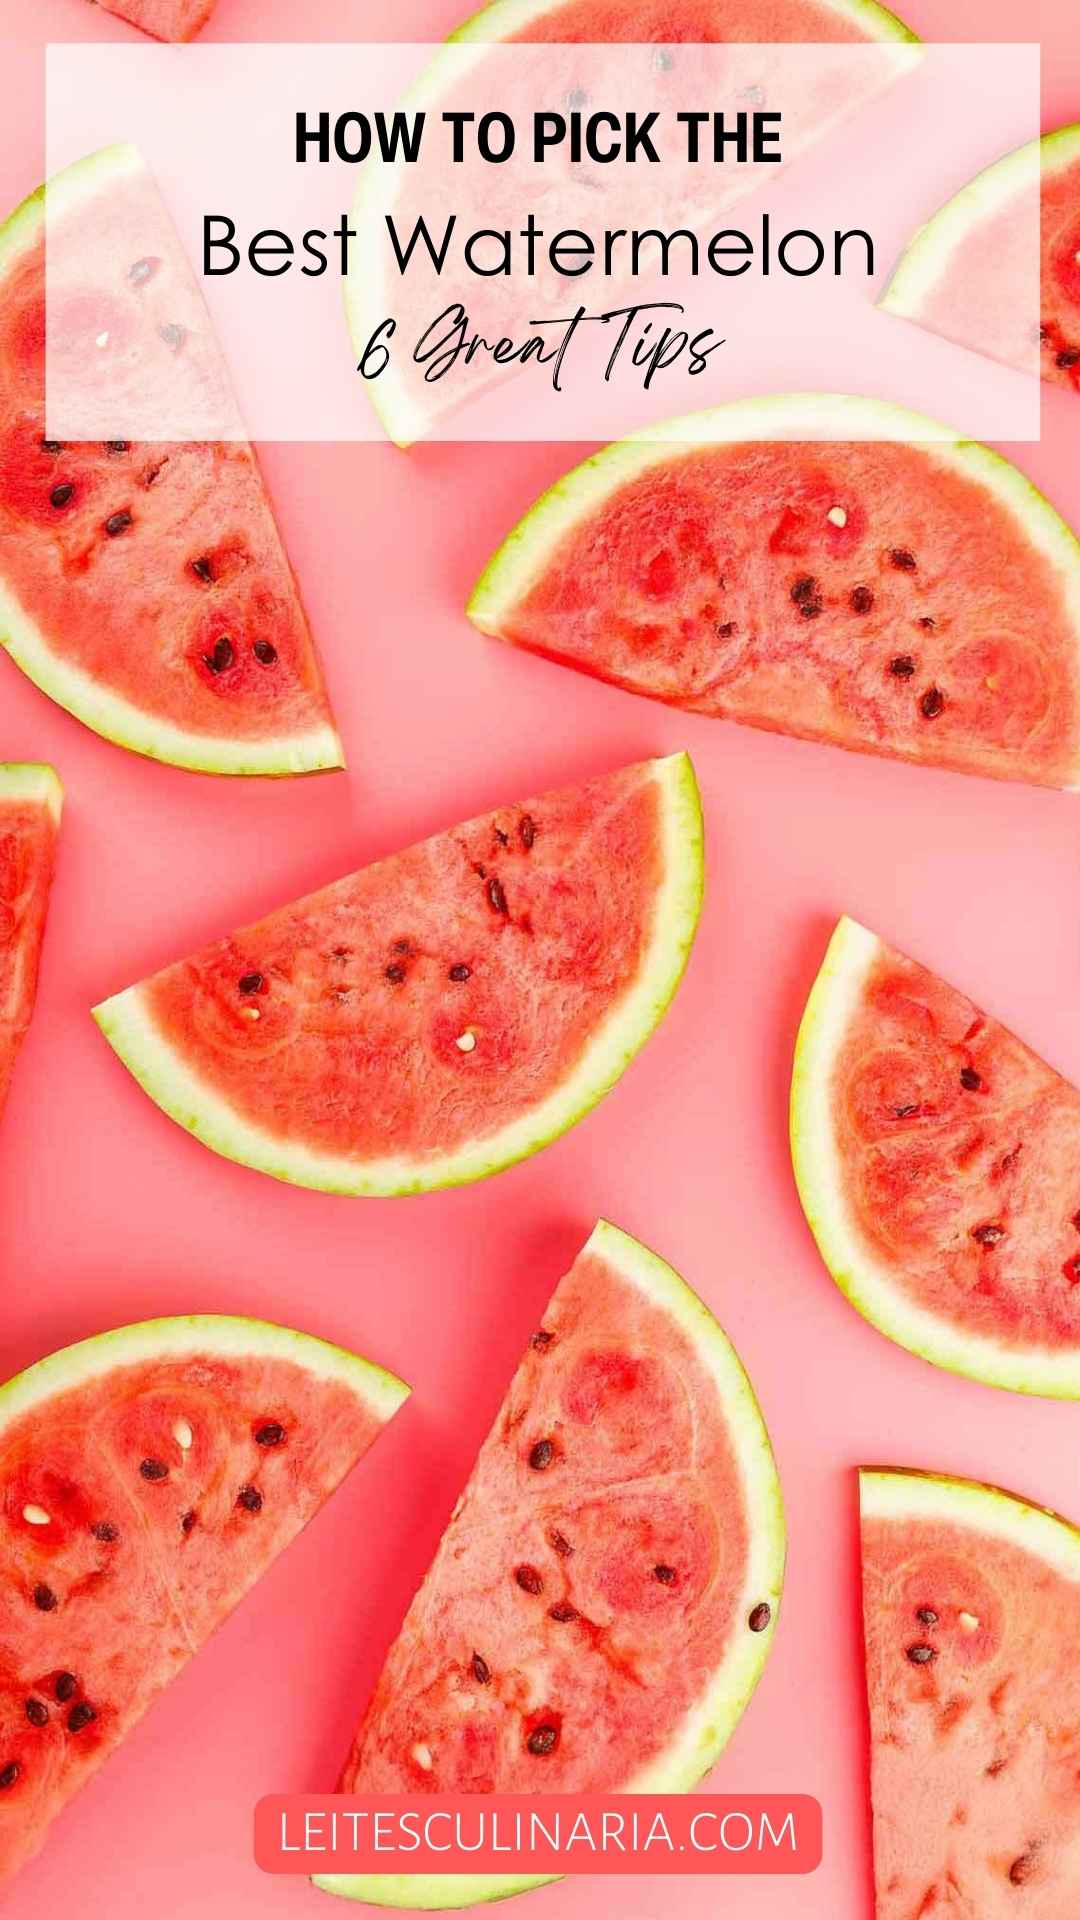 Slices of watermelon on a pink background.